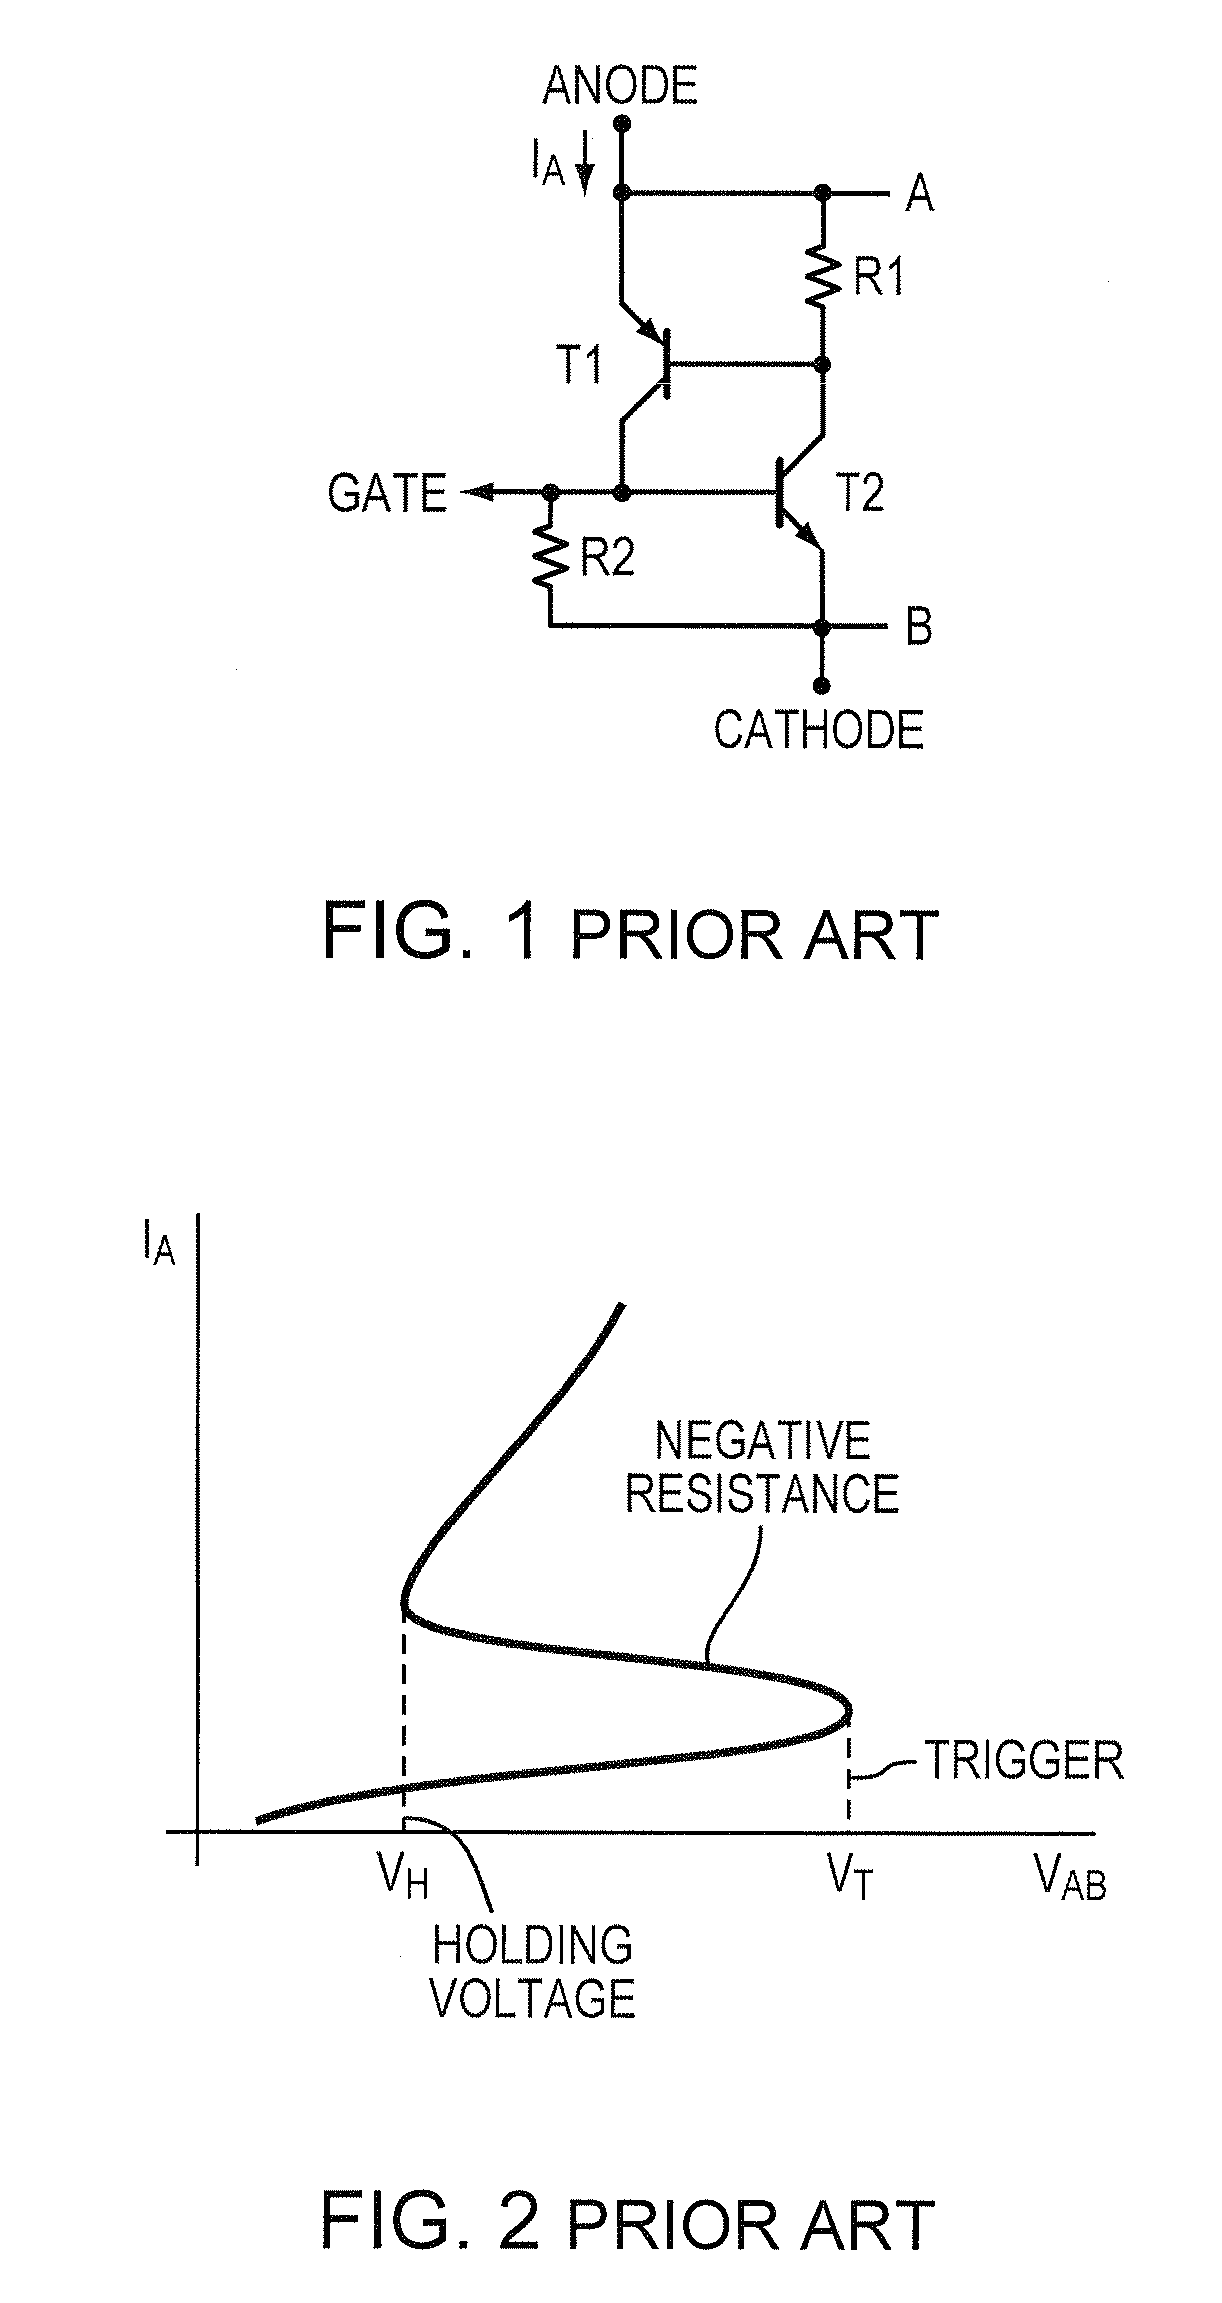 Un-assisted, low-trigger and high-holding voltage scr